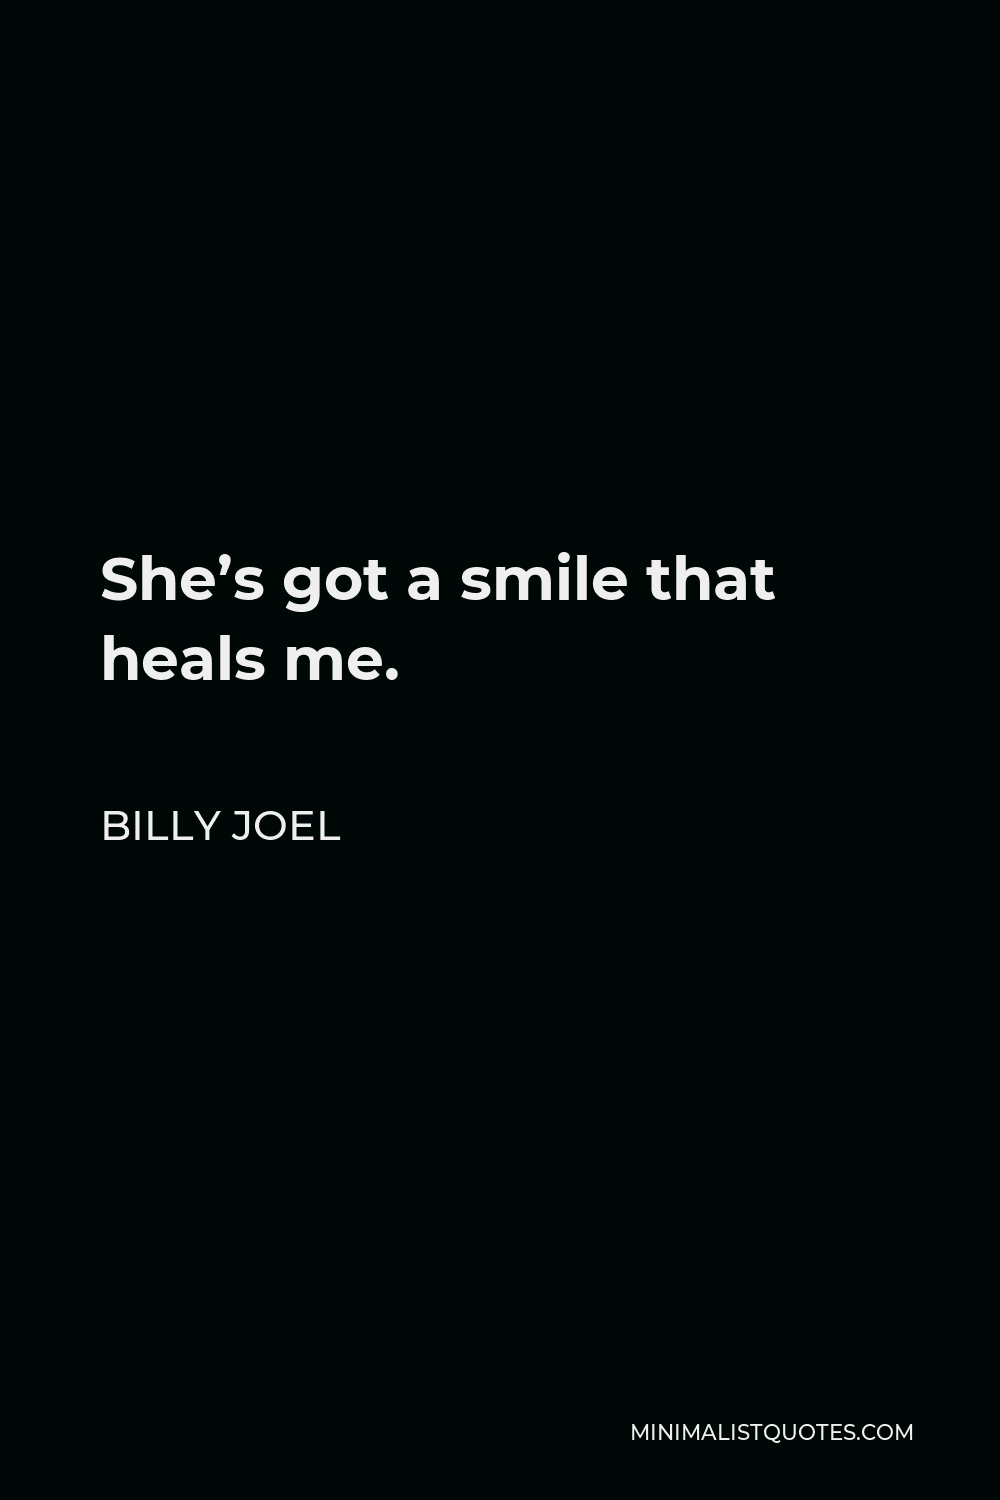 Billy Joel Quote - She’s got a smile that heals me.